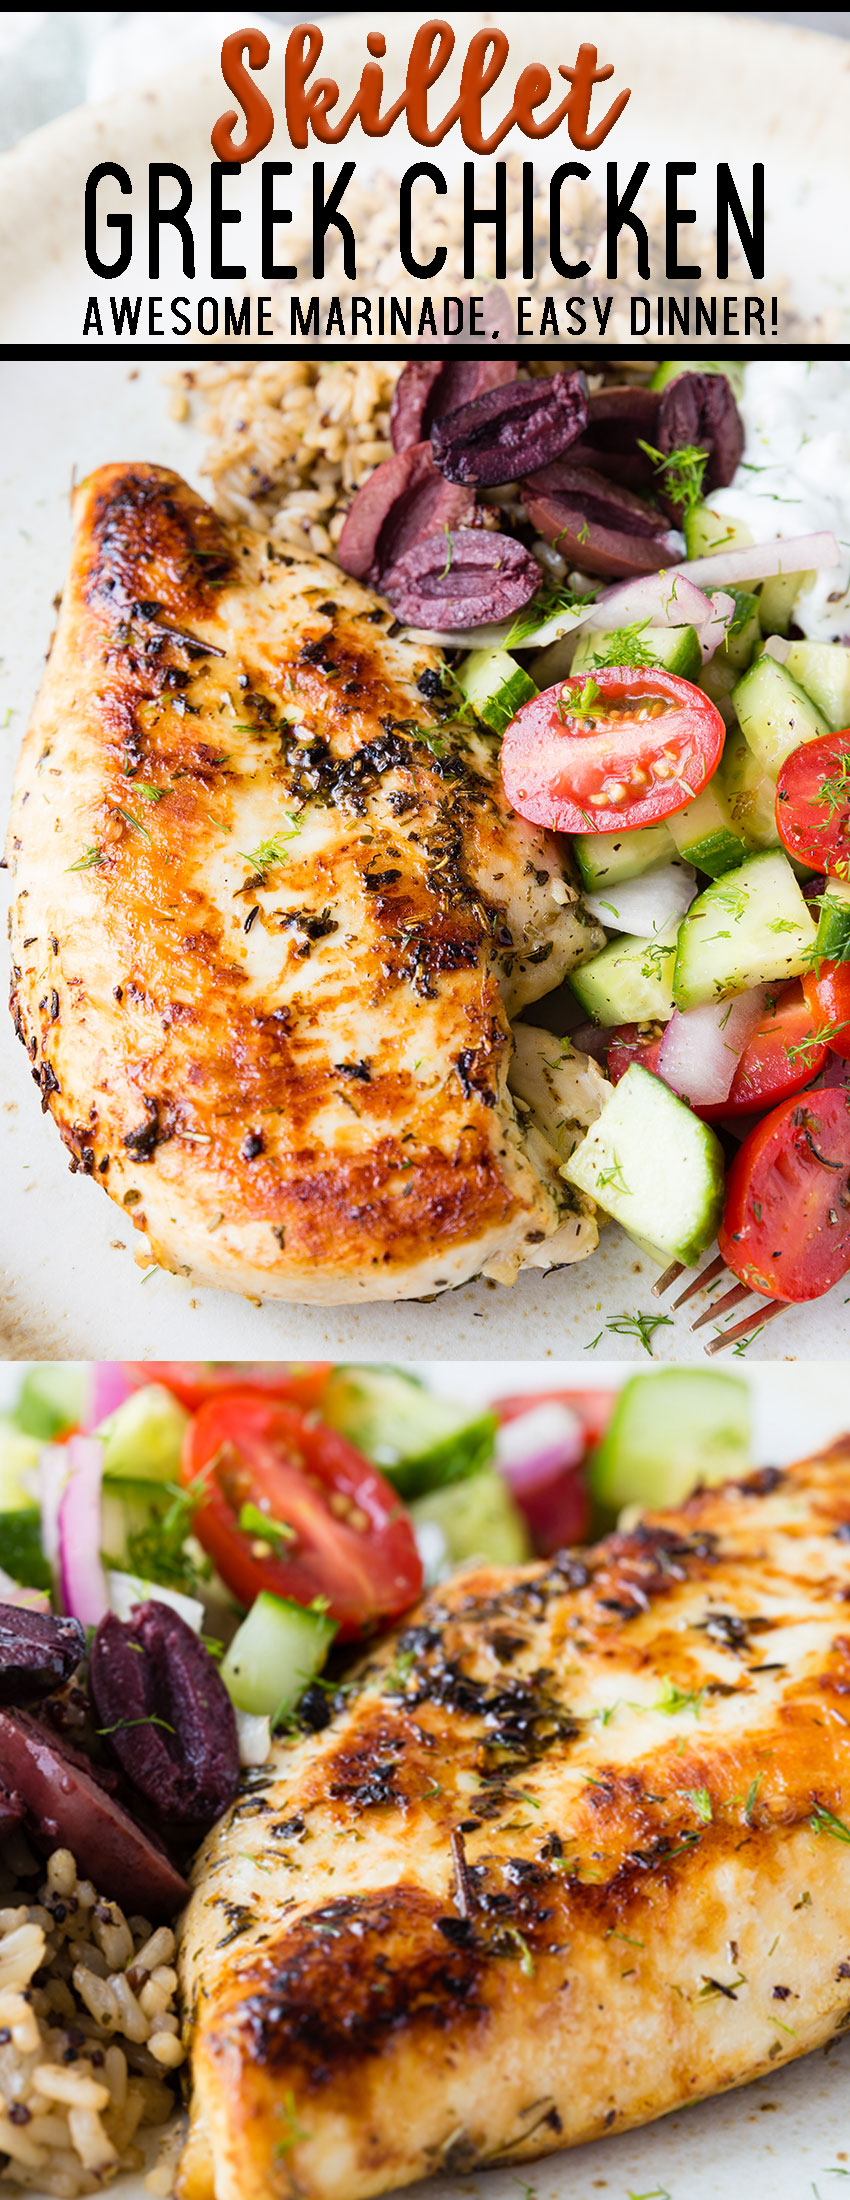 Skillet greek chicken, chicken marinated in a lovely combo of mediterranean flavors and seared to perfection stove top